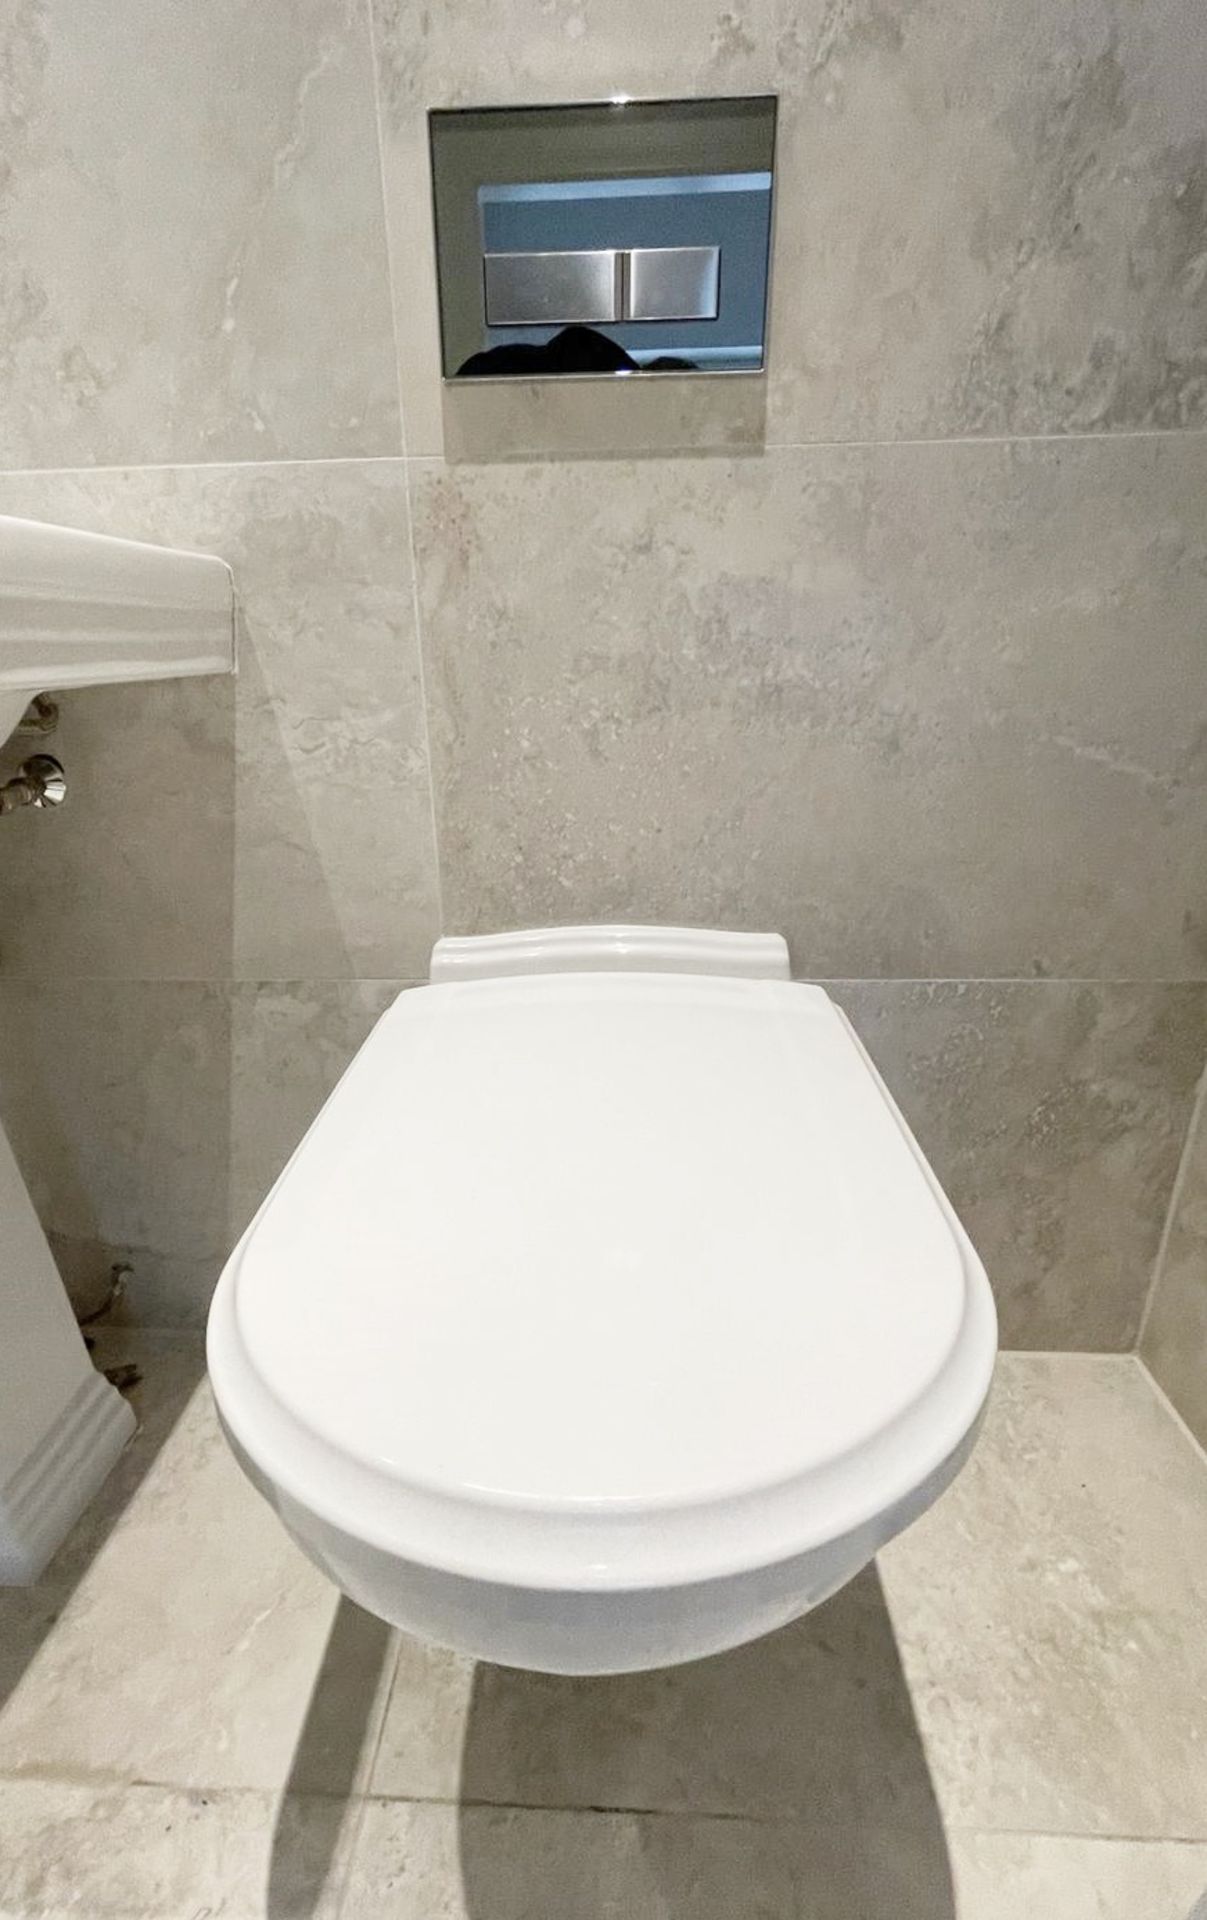 1 x VILLEROY & BOCH Wall Hung Toilet with Geberit Flush Plate - Ref: PAN231 - CL896 - NO VAT ON - Image 2 of 4